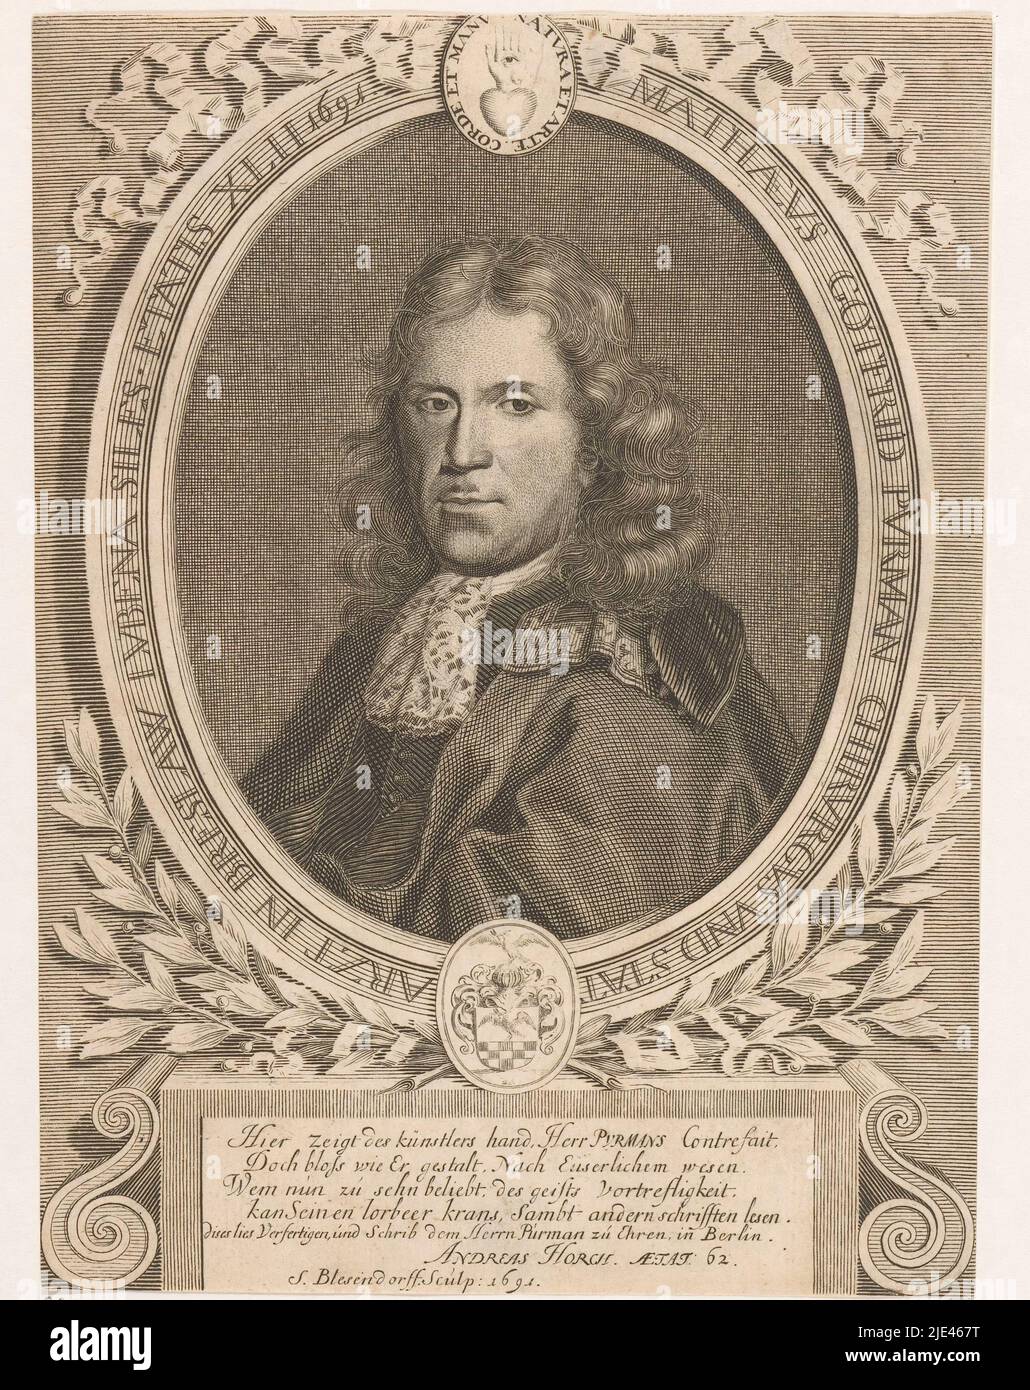 Portrait of Matthias Gottfried Purmann, Samuel Blesendorf, 1691, print maker: Samuel Blesendorf, (mentioned on object), Andreas Horch, (mentioned on object), Berlin, 1691, paper, engraving, h 190 mm - w 138 mm Stock Photo